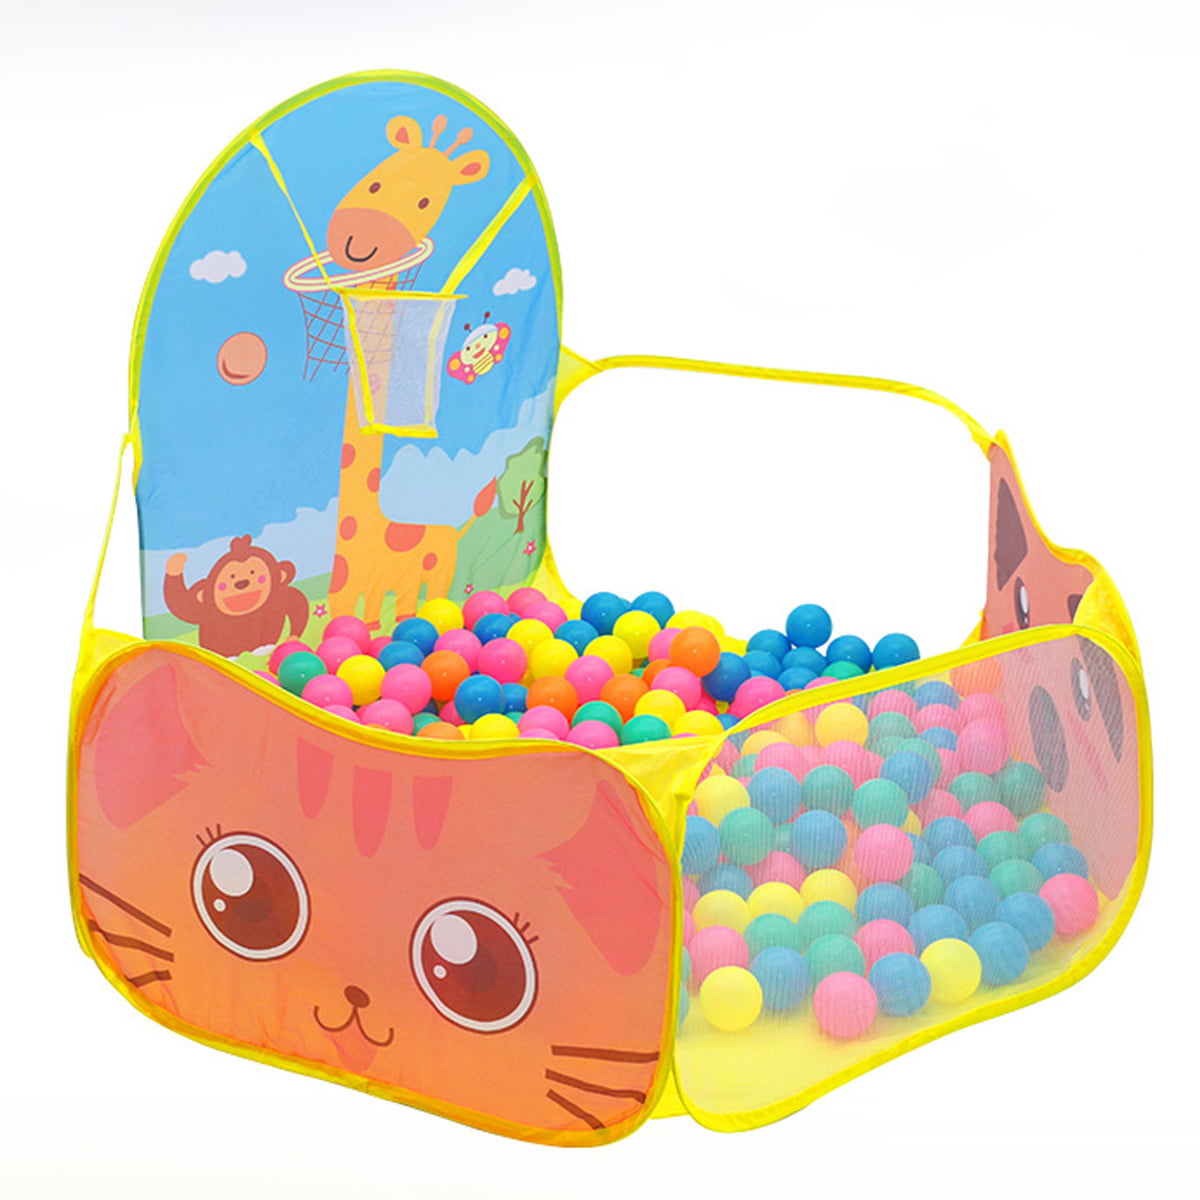 Kids Boys Girls Educational 1.5m Tent Baby Toy Ball Pool With ball Basket 